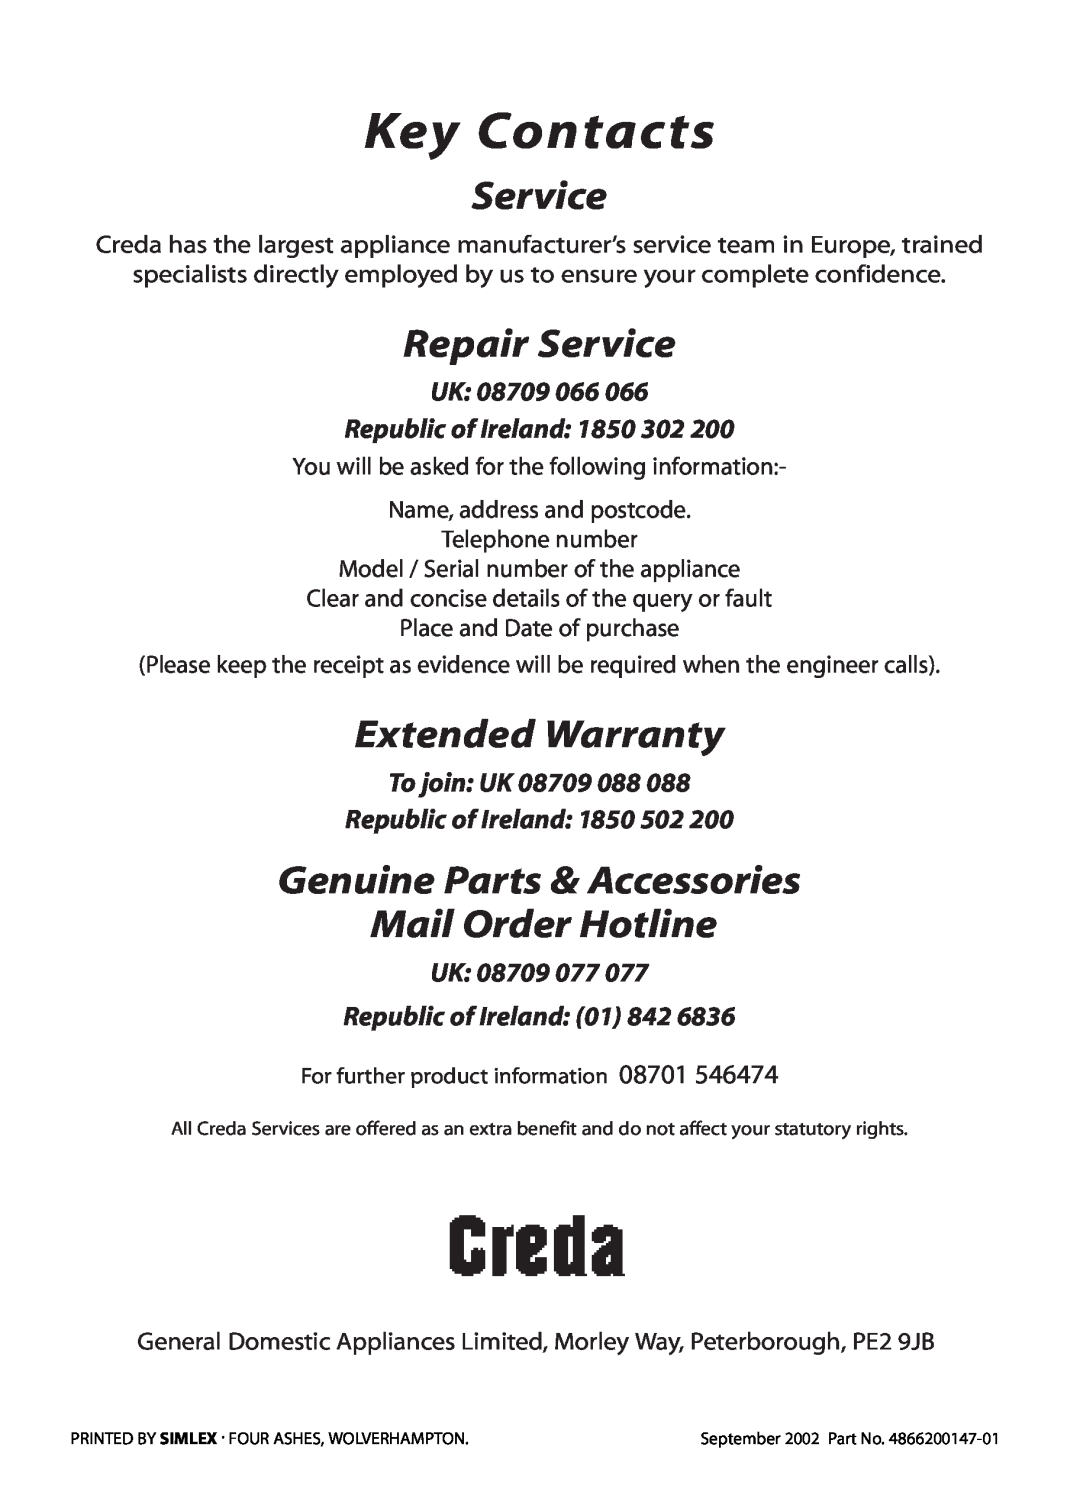 Creda CB01E manual Key Contacts, Repair Service, Extended Warranty, Genuine Parts & Accessories Mail Order Hotline 